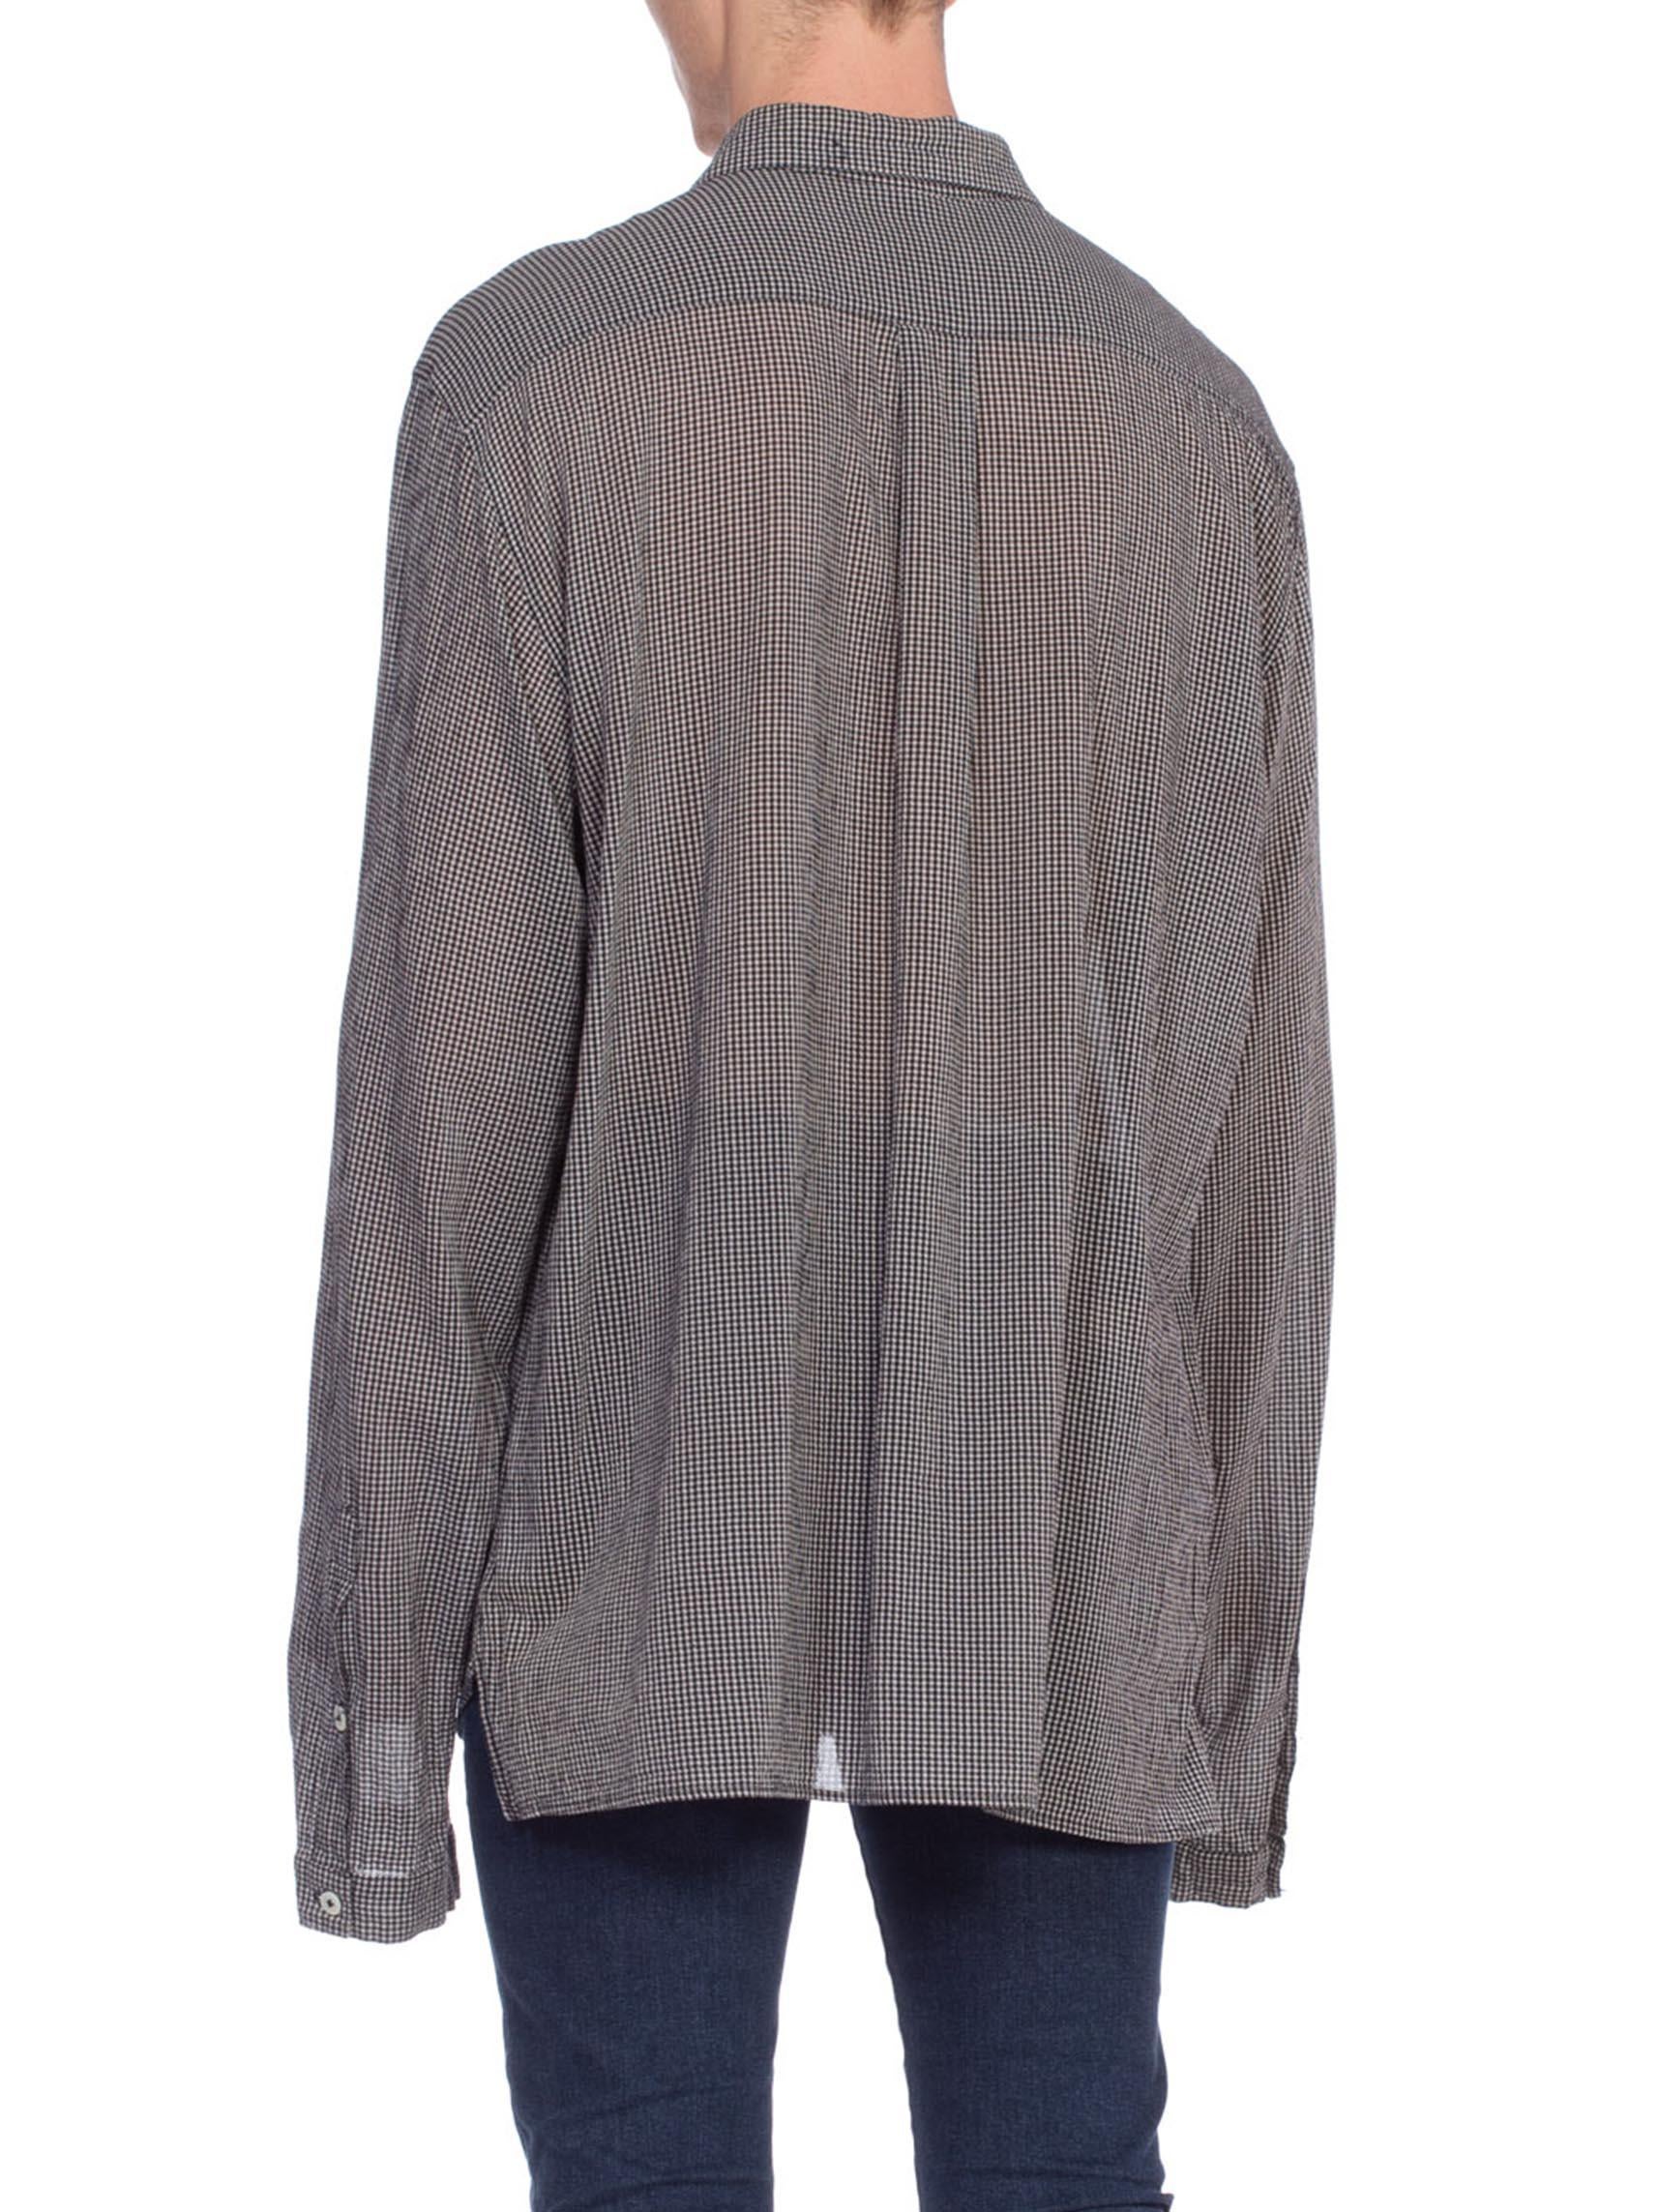 2000S ANN DEMEULEMEESTER Rayon Crepe Men's Oversized Bow Neck Shirt For Sale 5